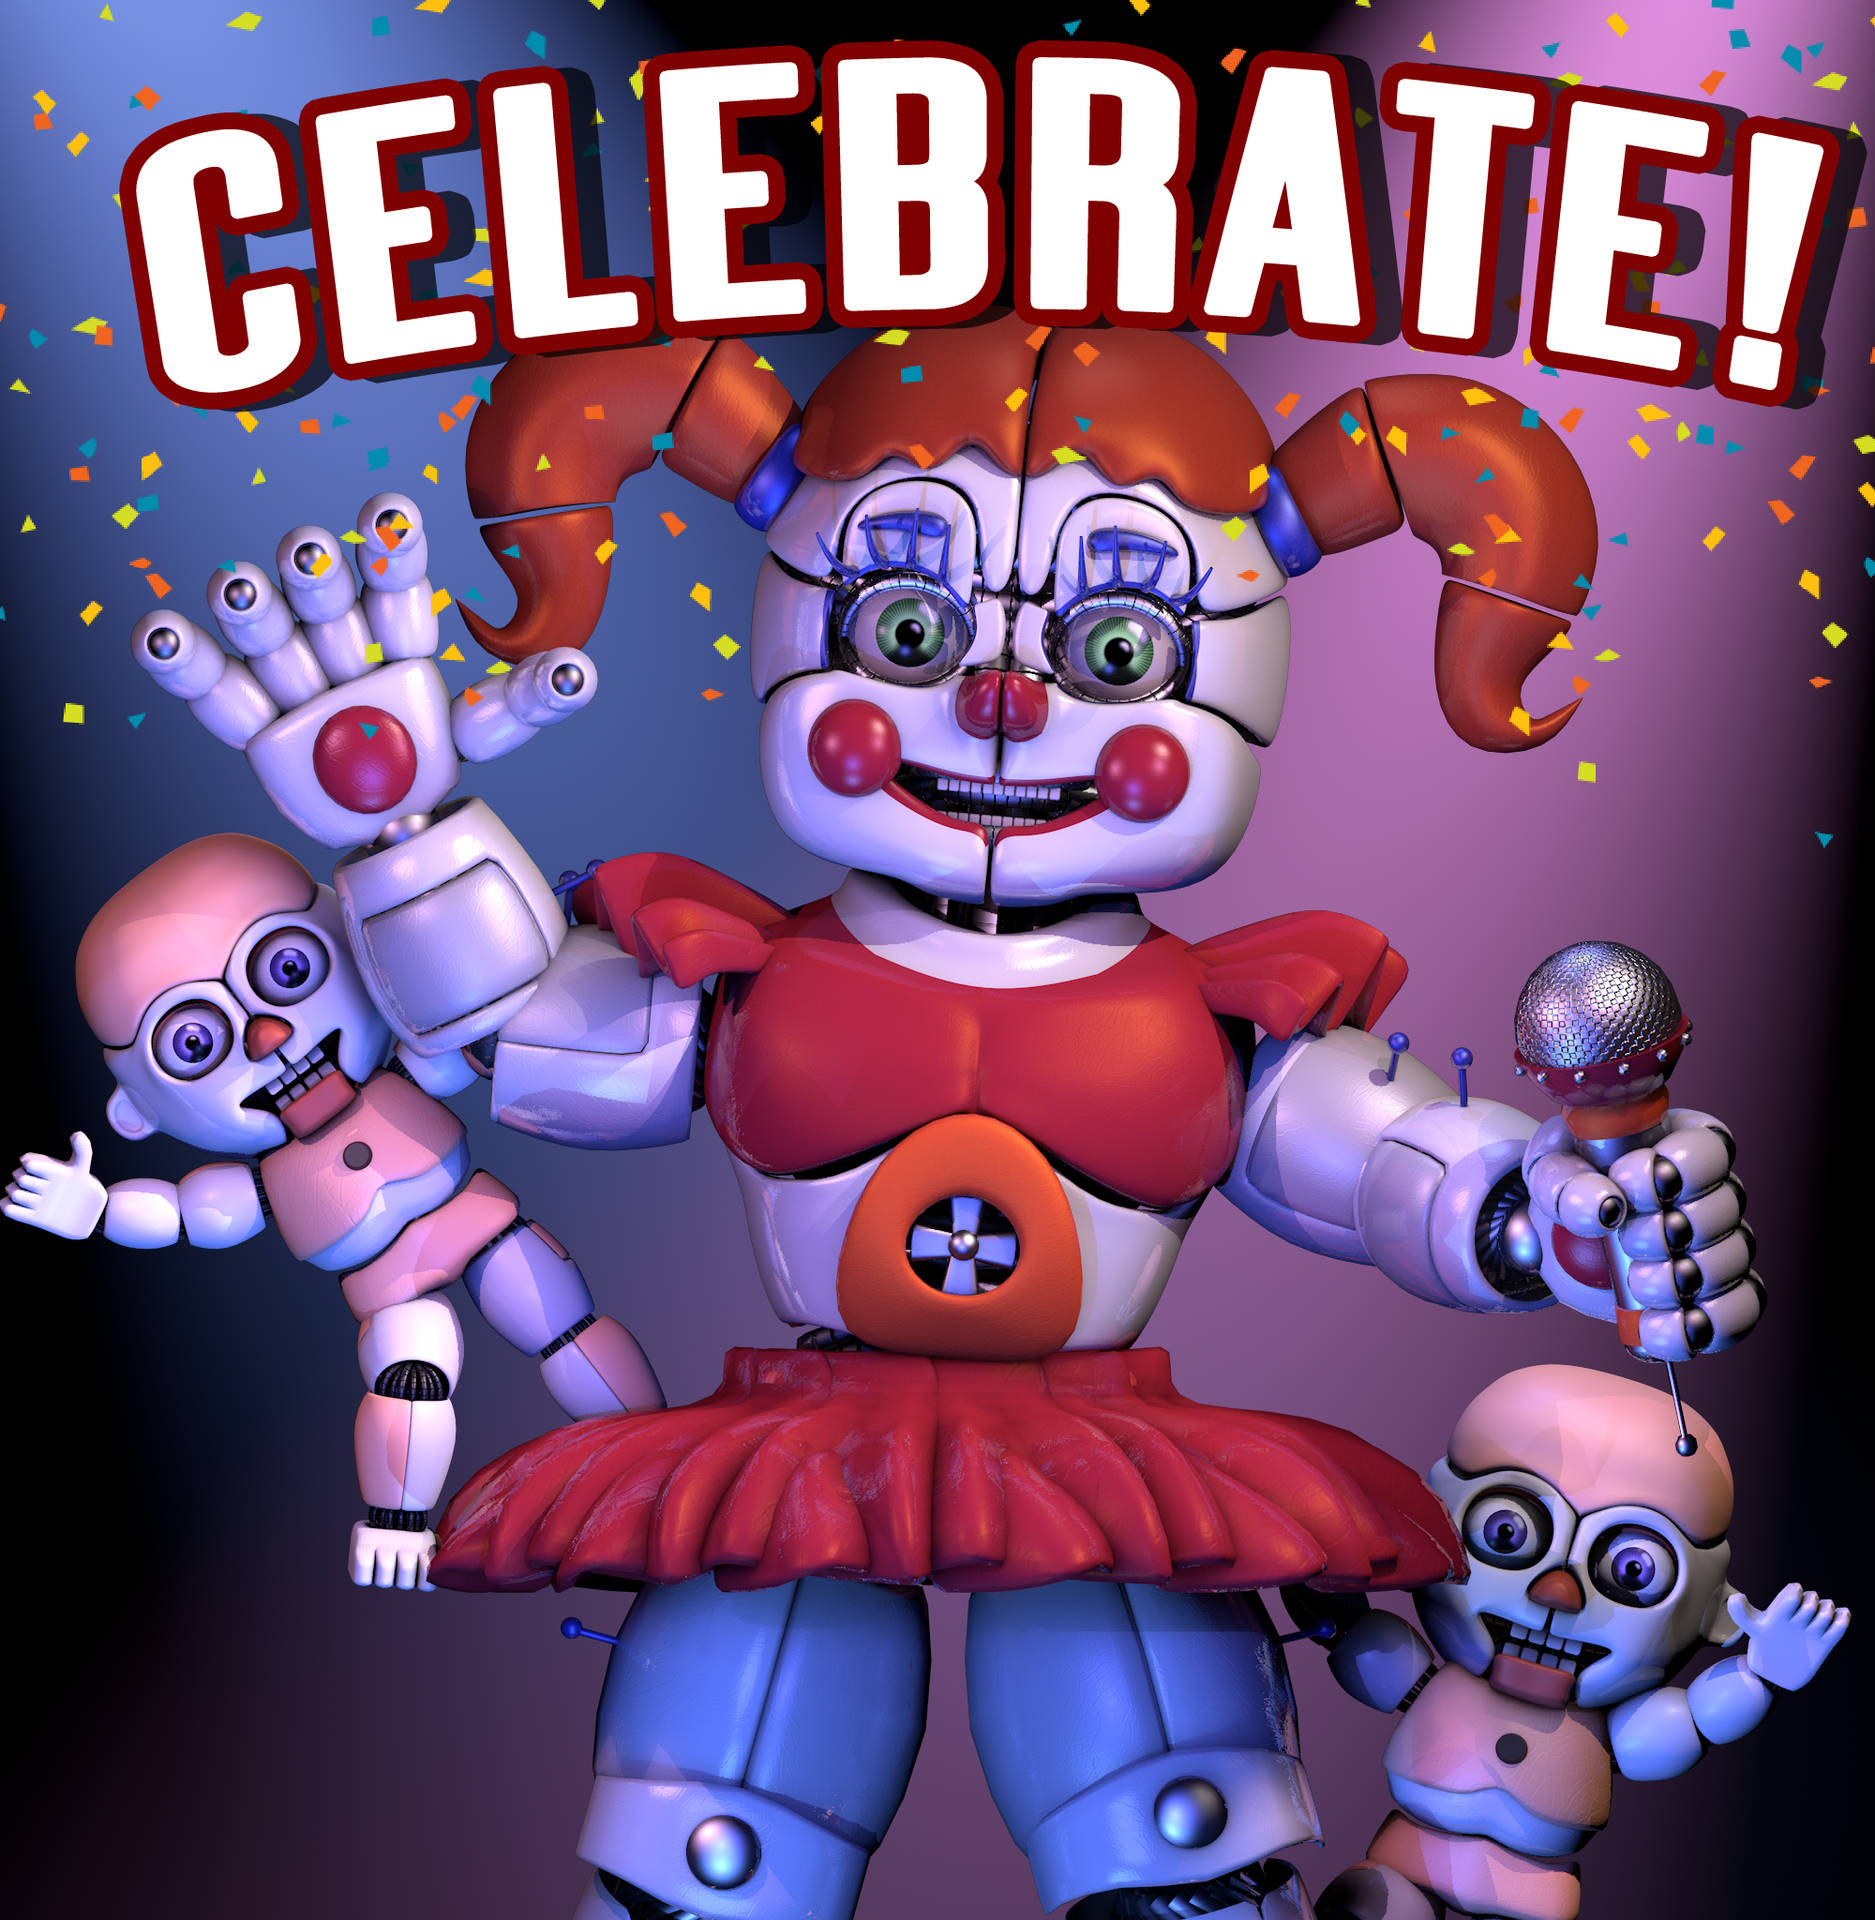 Exciting Circus Baby Celebration Wallpaper